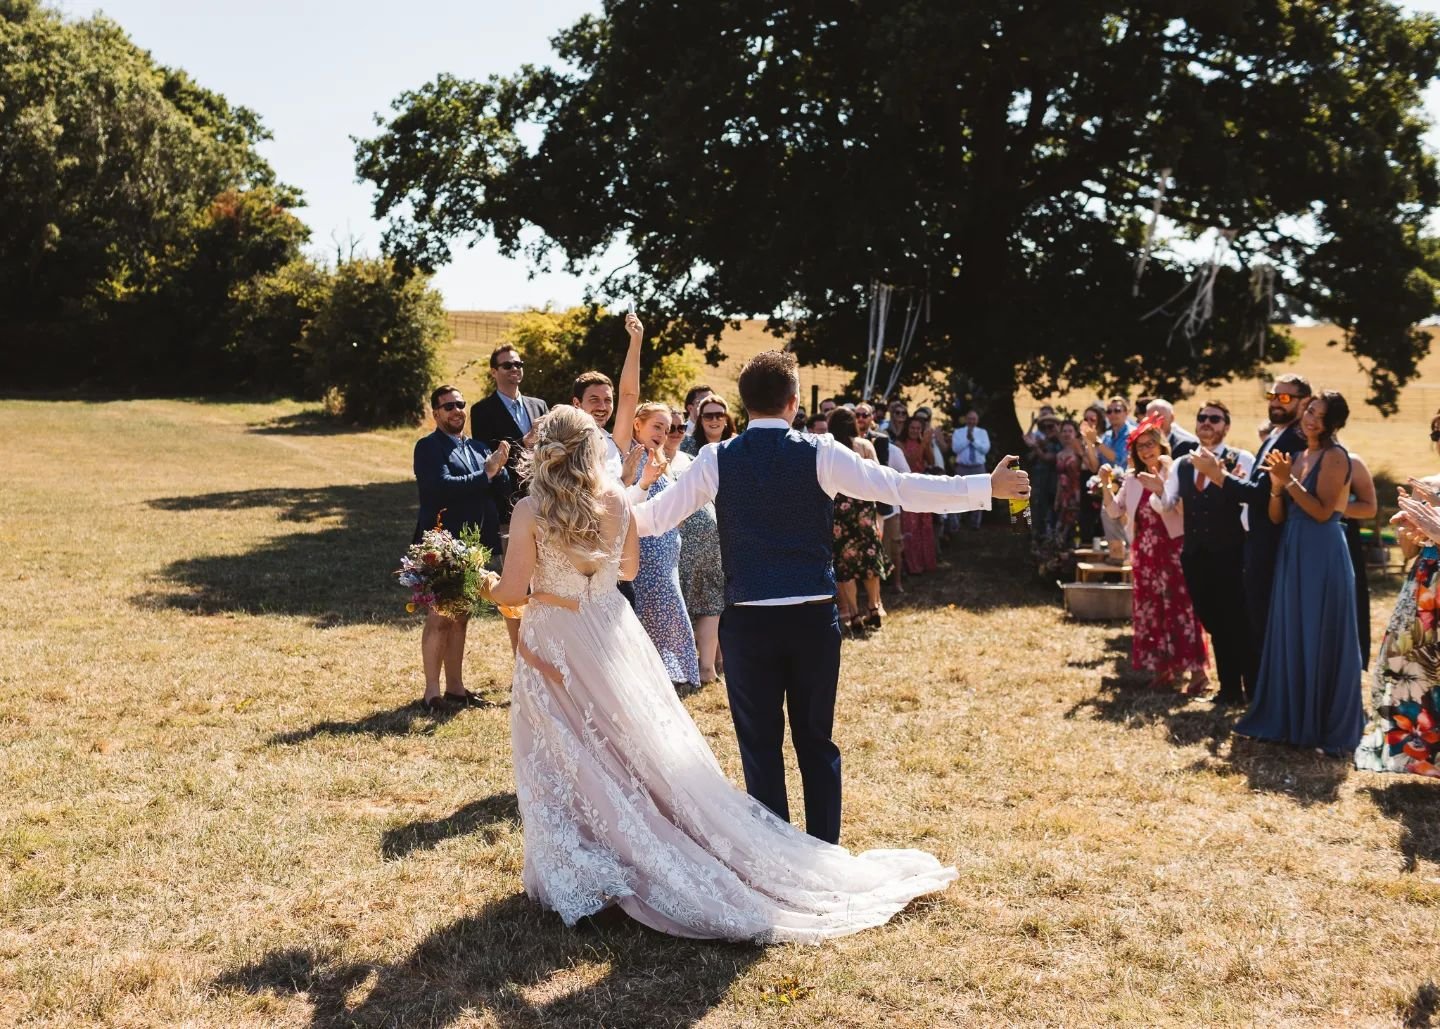 That just married feeling 🎉

Loved the free spirited, laid back vibe of this festival style wedding. Im a massive fan of a humanist ceremony and how personal and emotive they are! Especially when drinks during the ceremony are encouraged! 🥂

@fiest